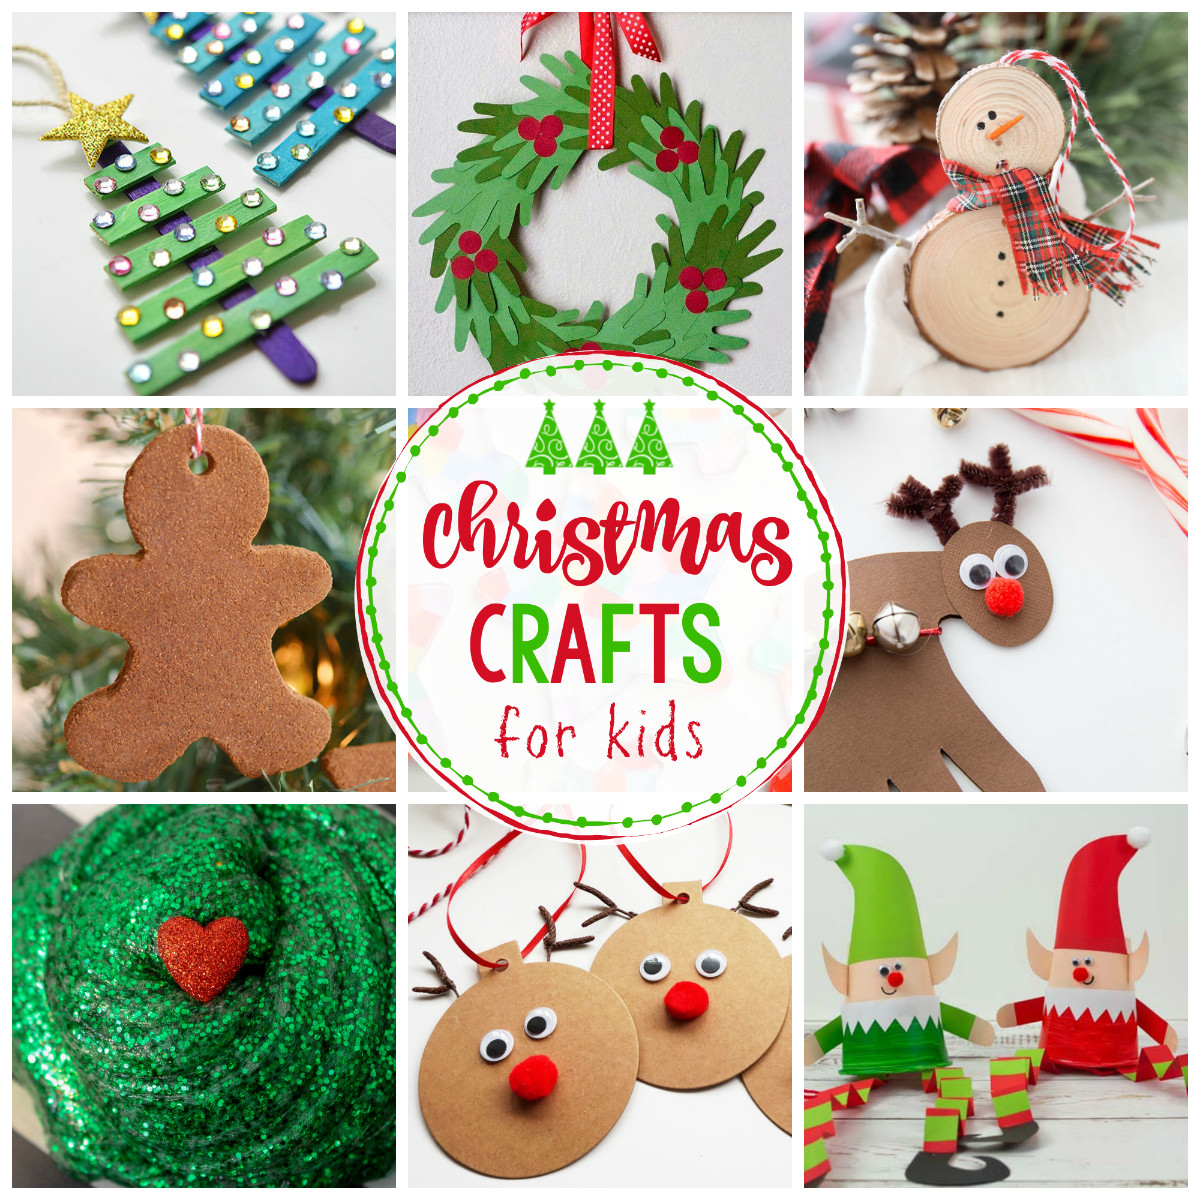 Easy Christmas Craft Gifts
 25 Easy Christmas Crafts for Kids Crazy Little Projects